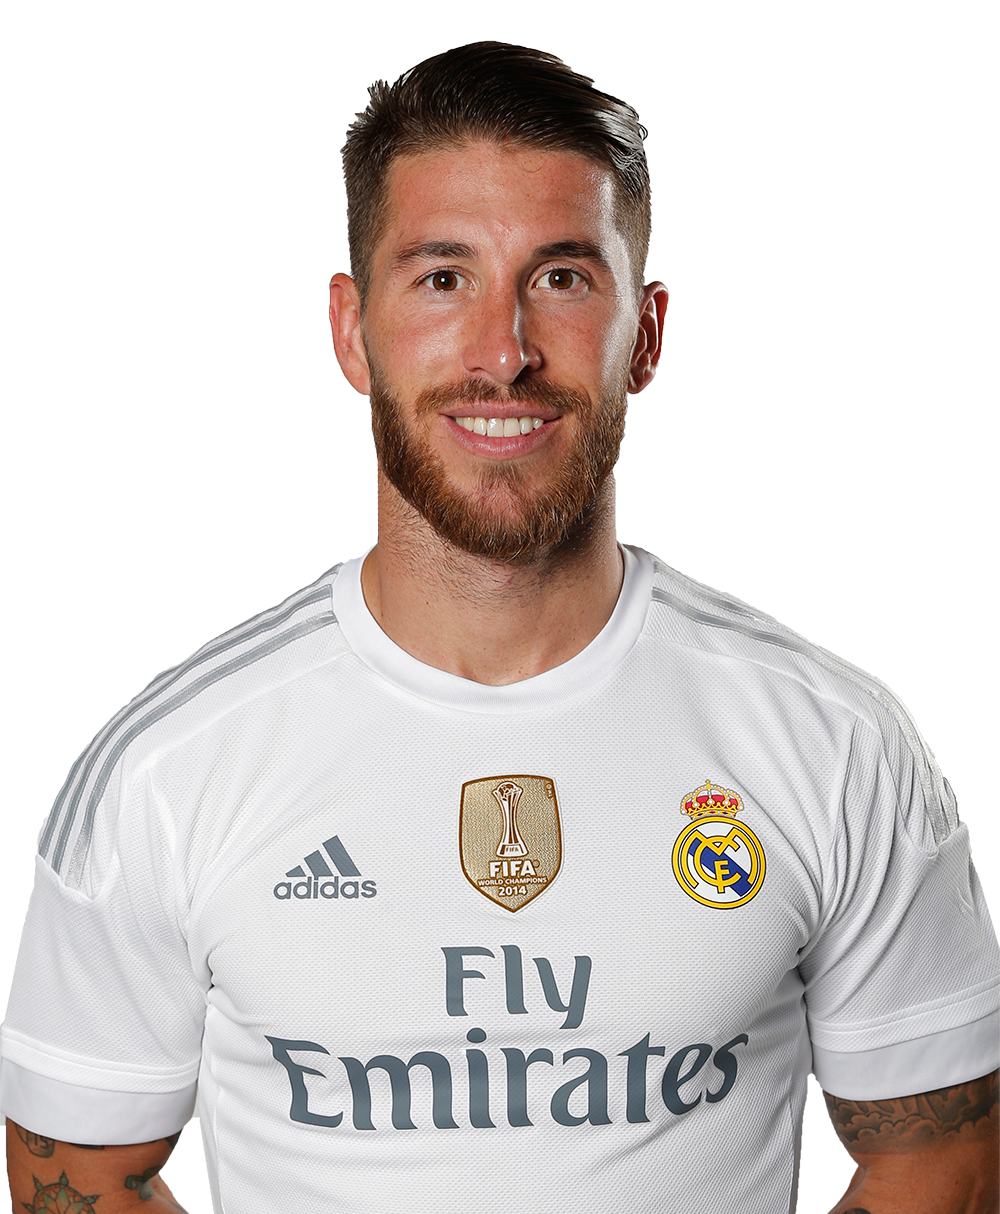 Sergio Ramos brought noise, love and passion to Real Madrid – he